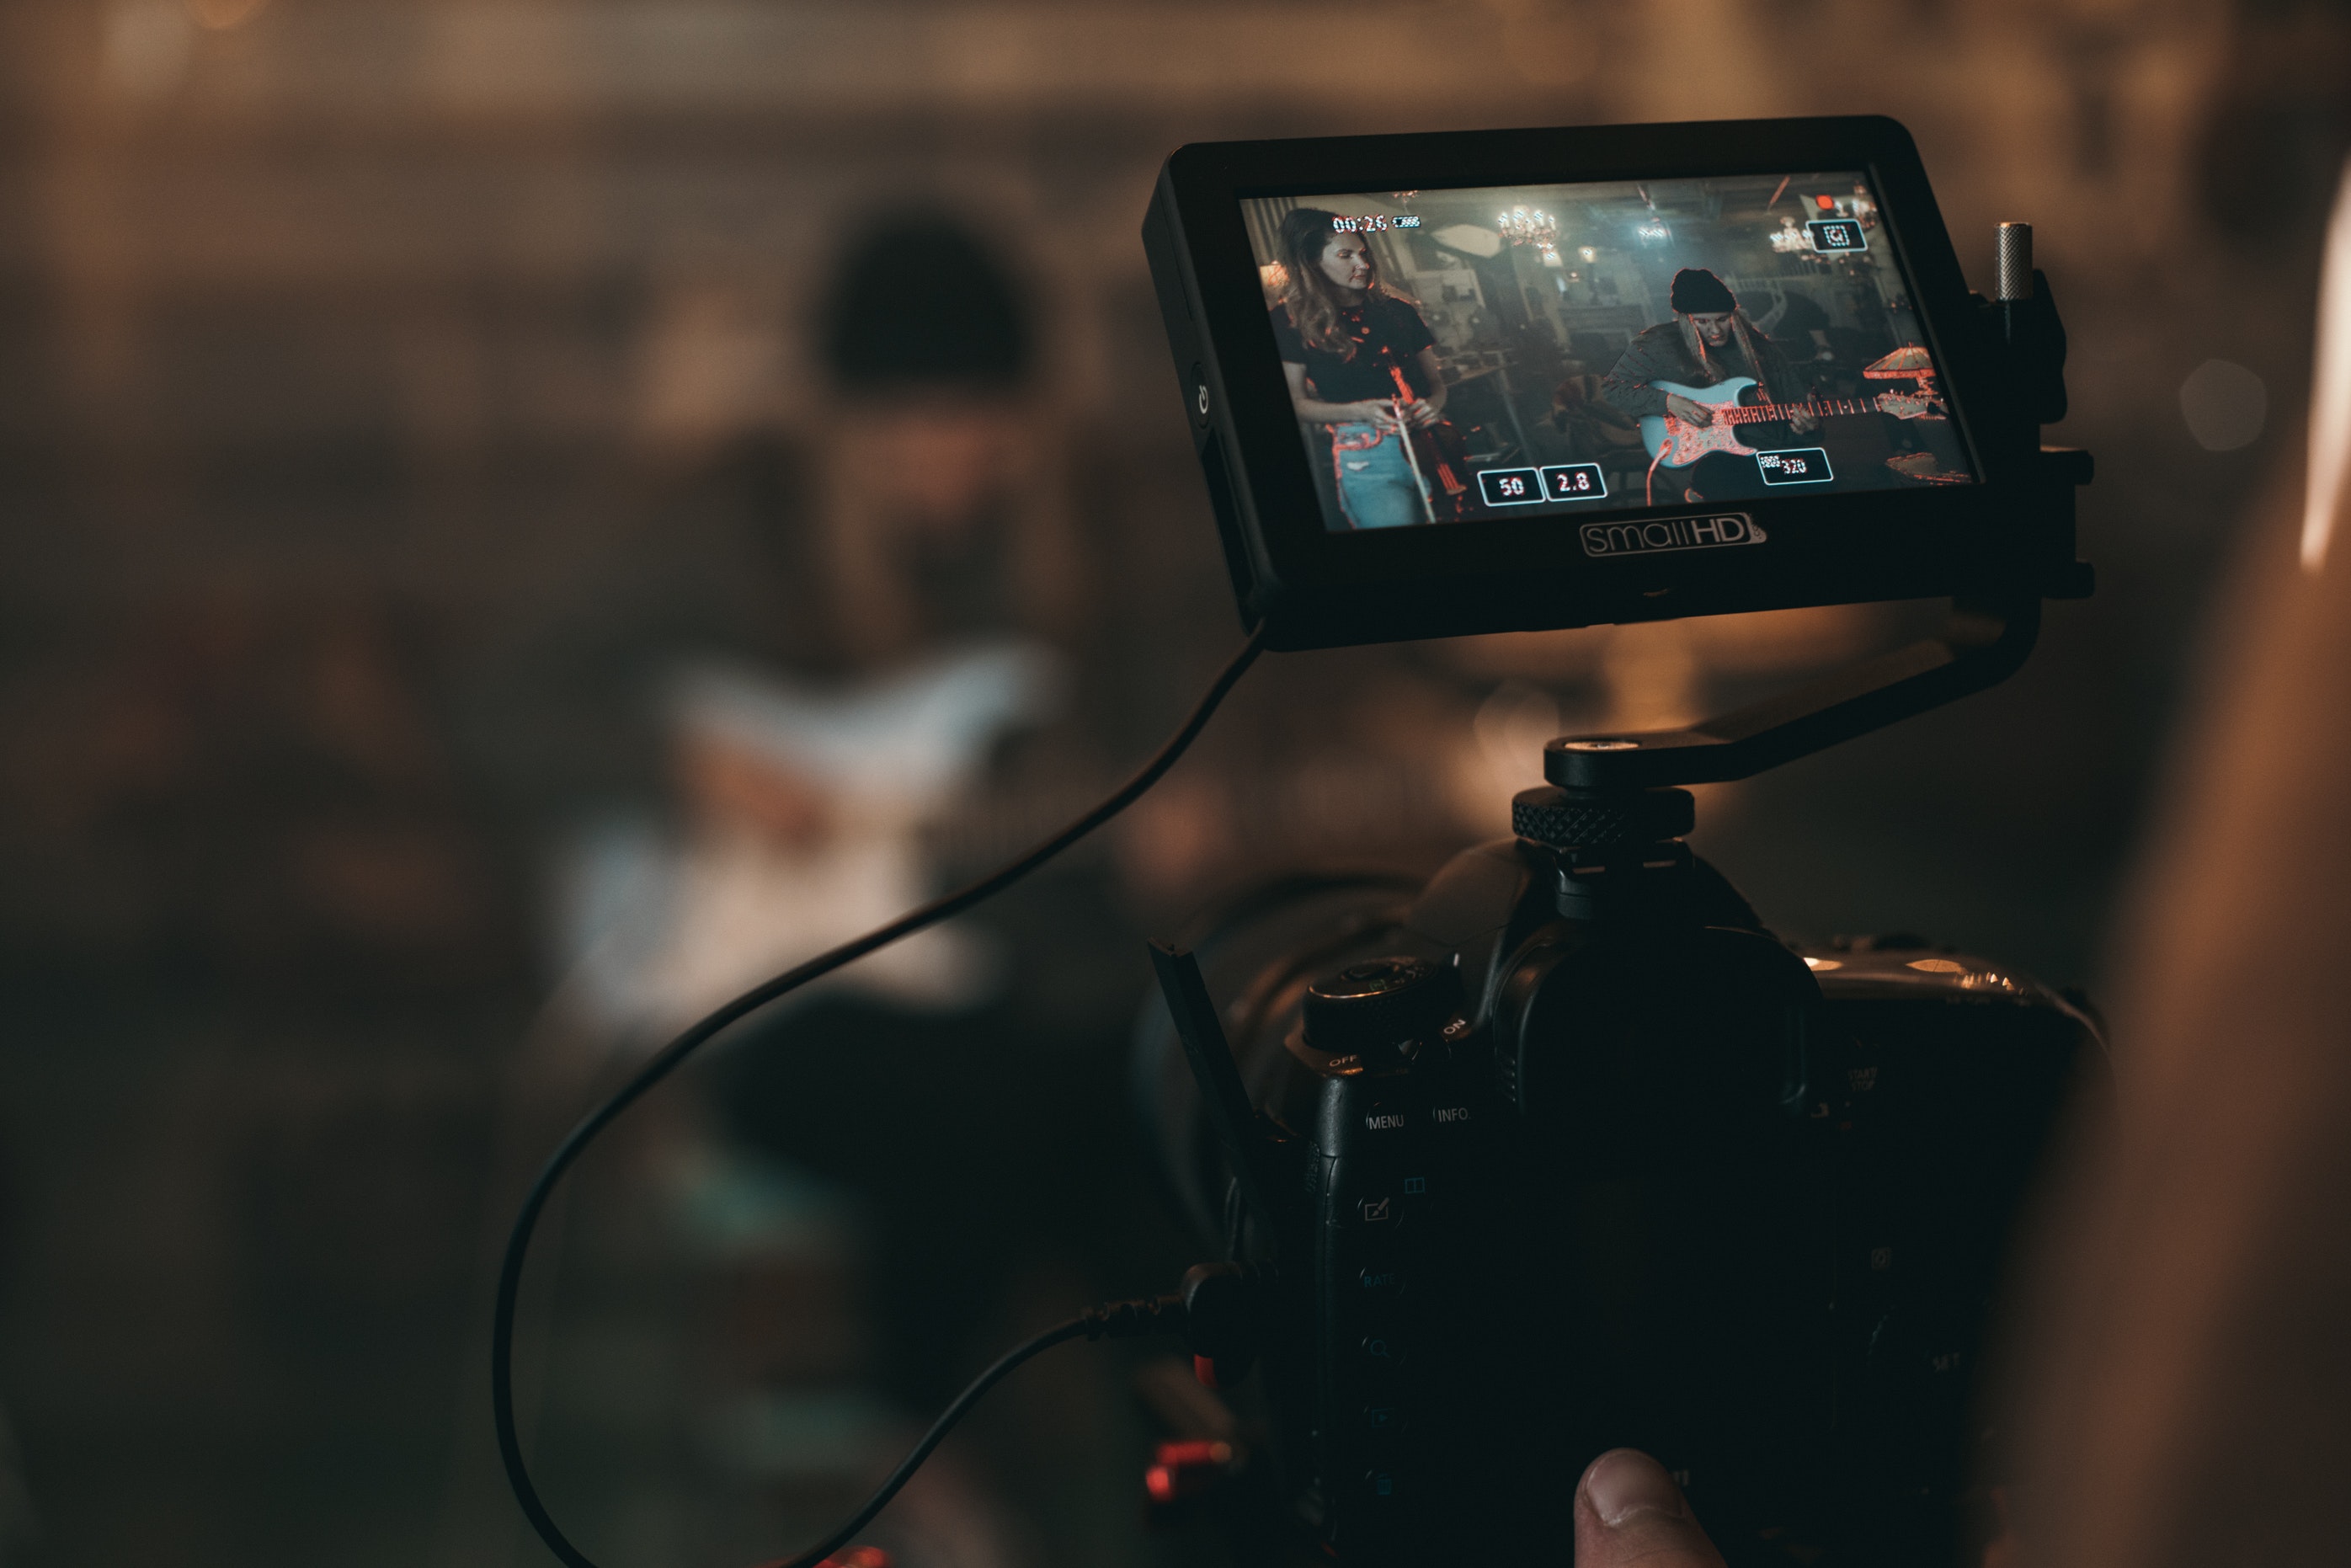 How to Harness the Power of Video to Show Your Expertise